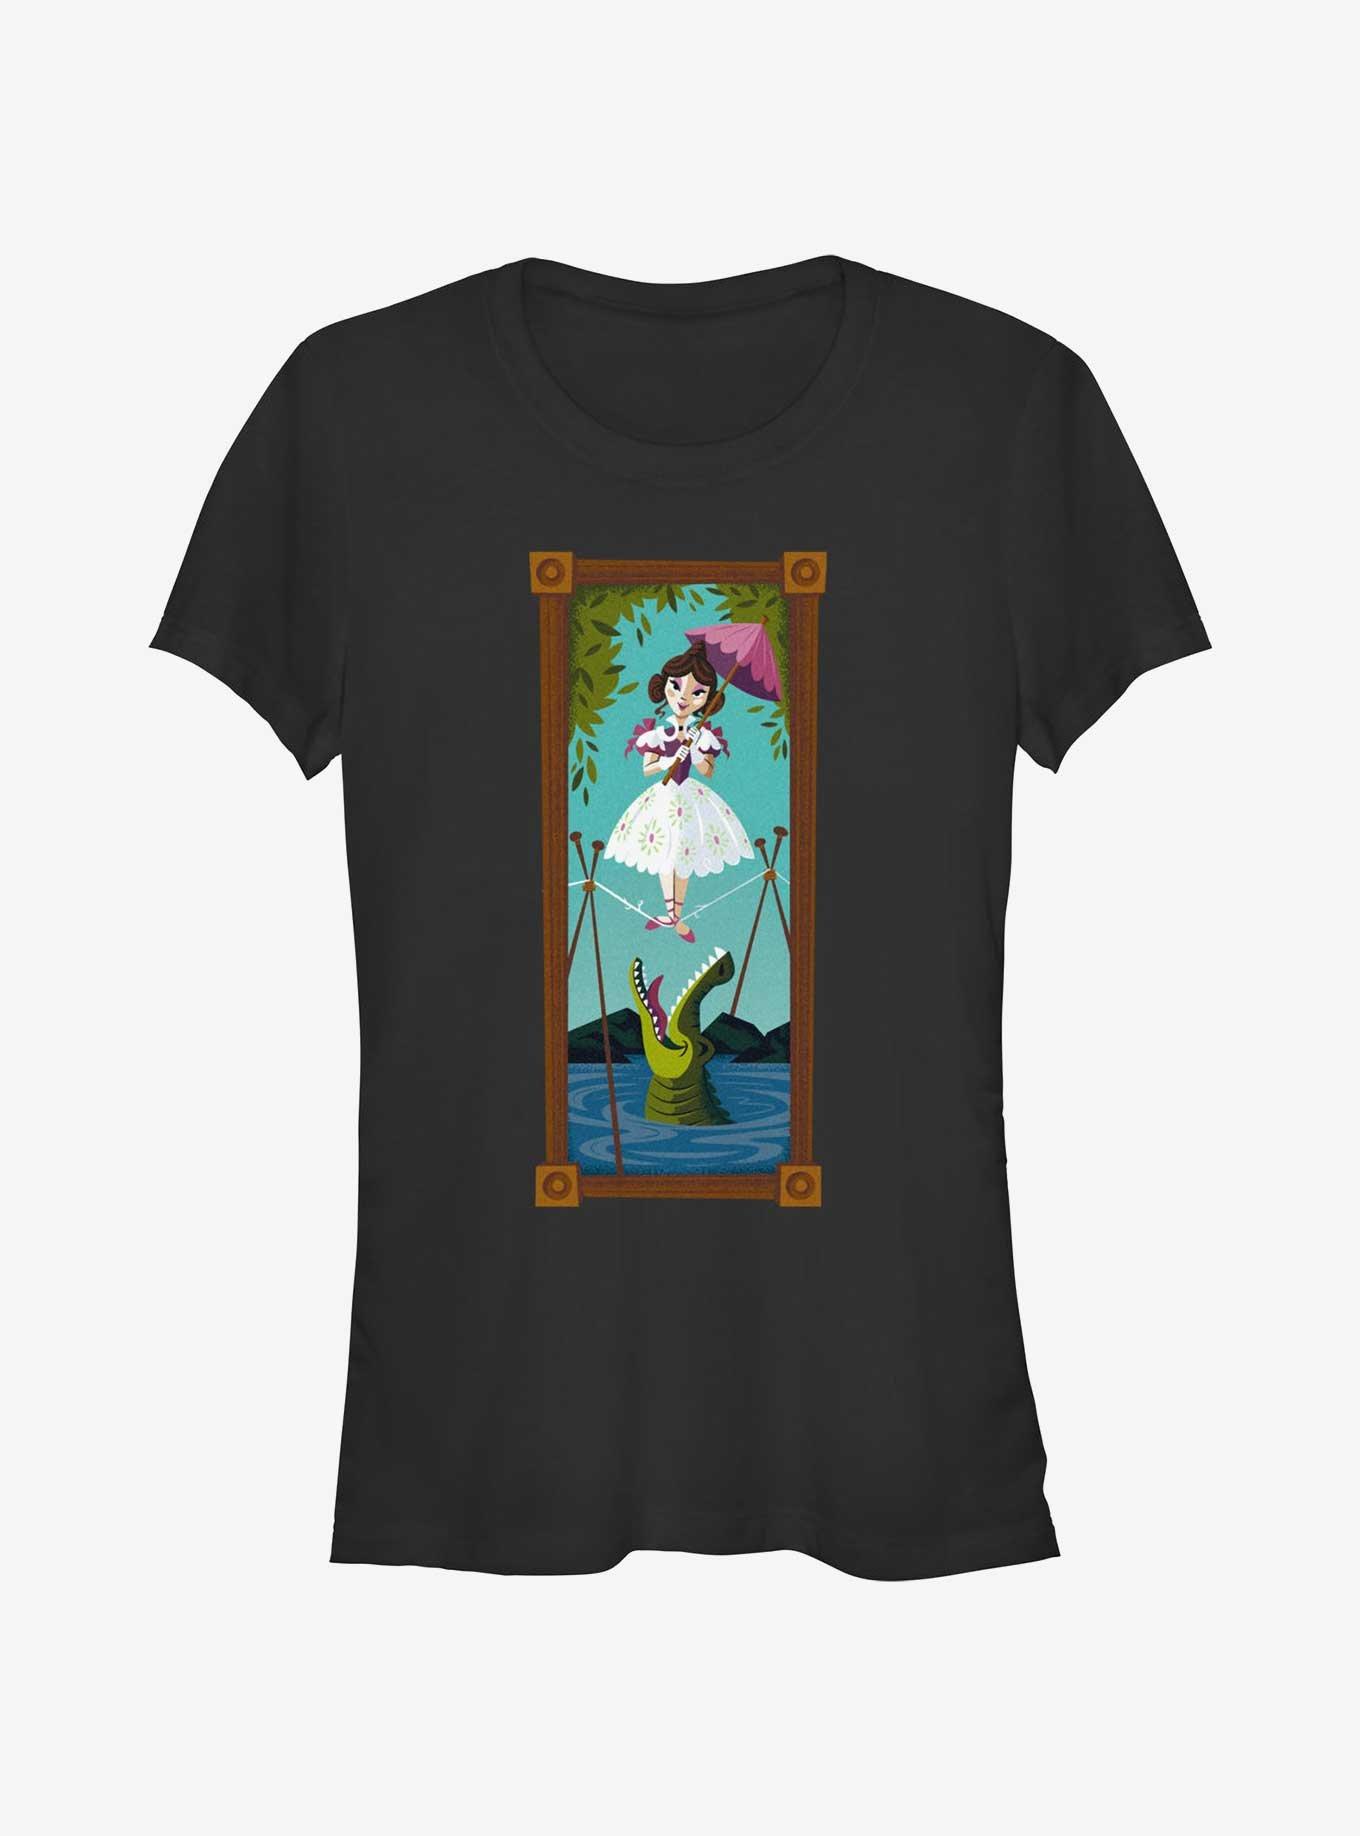 Disney The Haunted Mansion Tightrope Walker Portrait Girls T-Shirt Hot Topic Web Exclusive